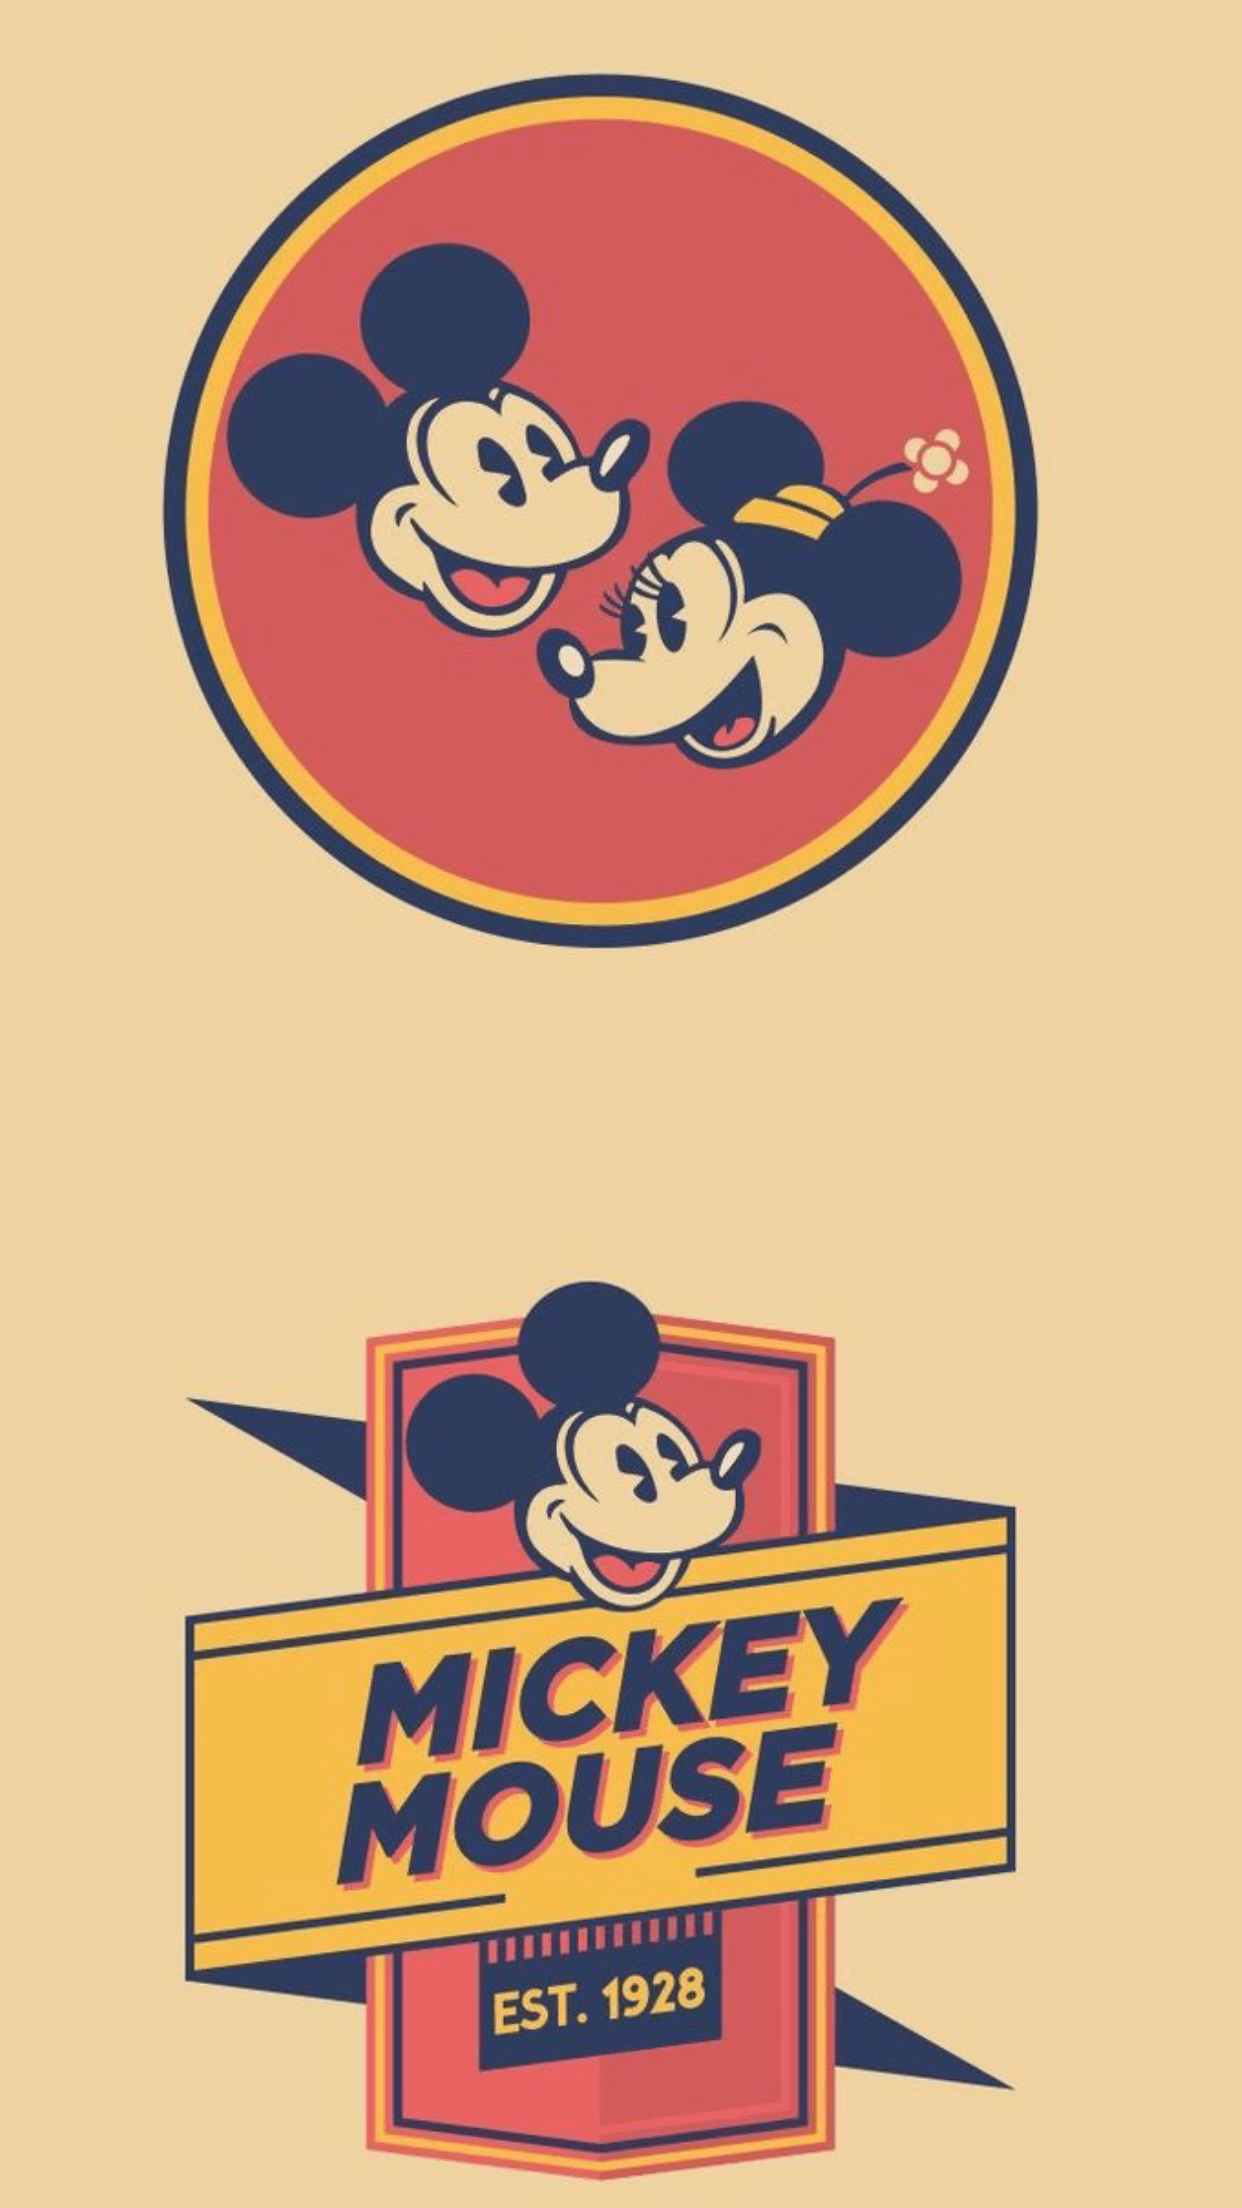 Mickey and Minnie. Mickey mouse wallpaper, Wallpaper iphone disney, Mickey mouse art